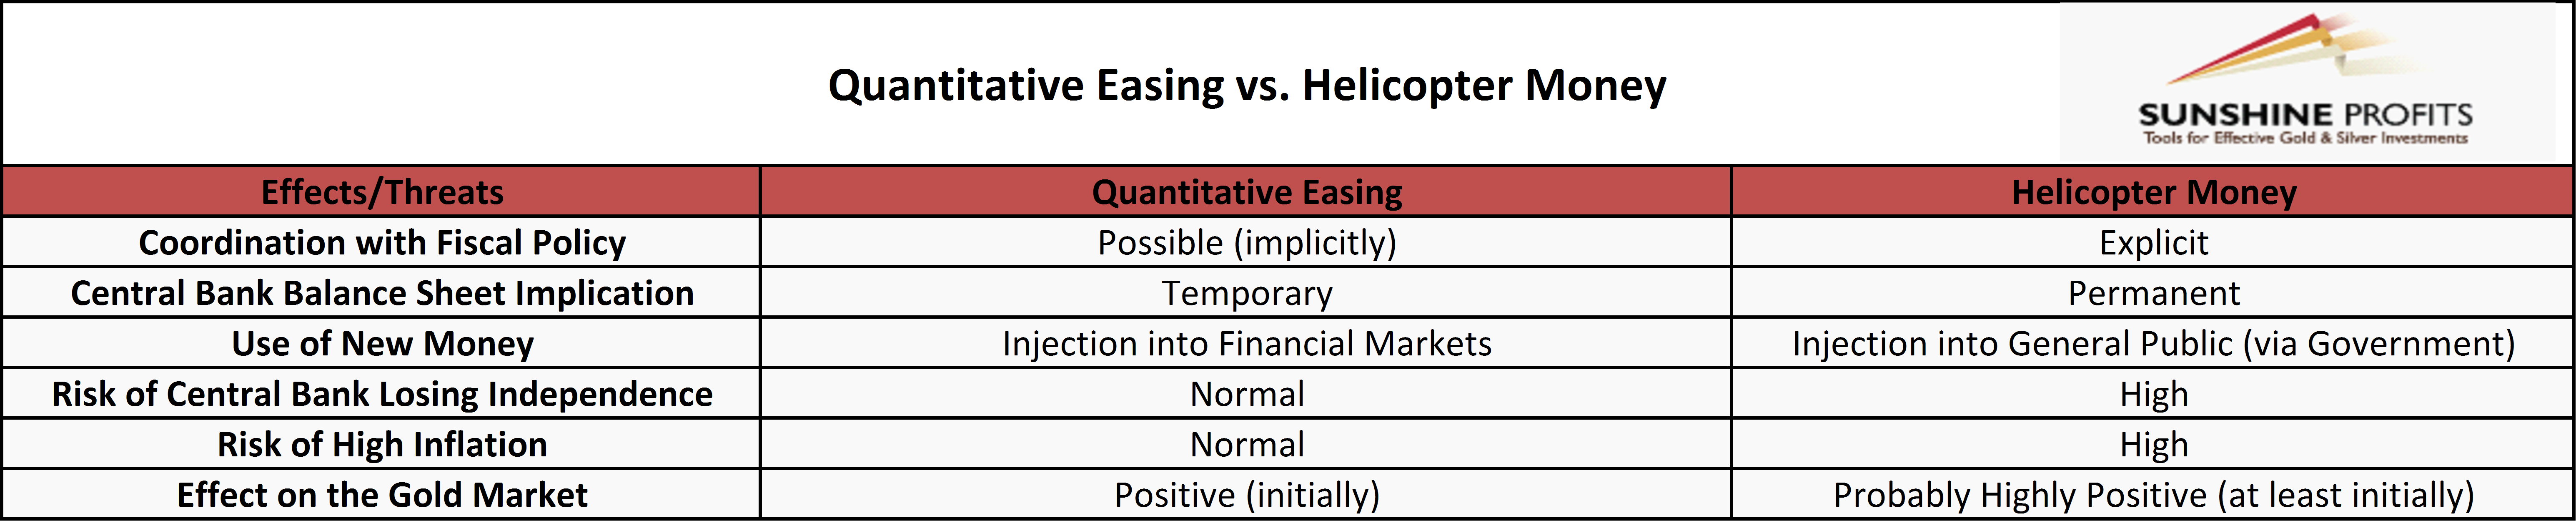 Comparison of quantitative easing and helicopter money